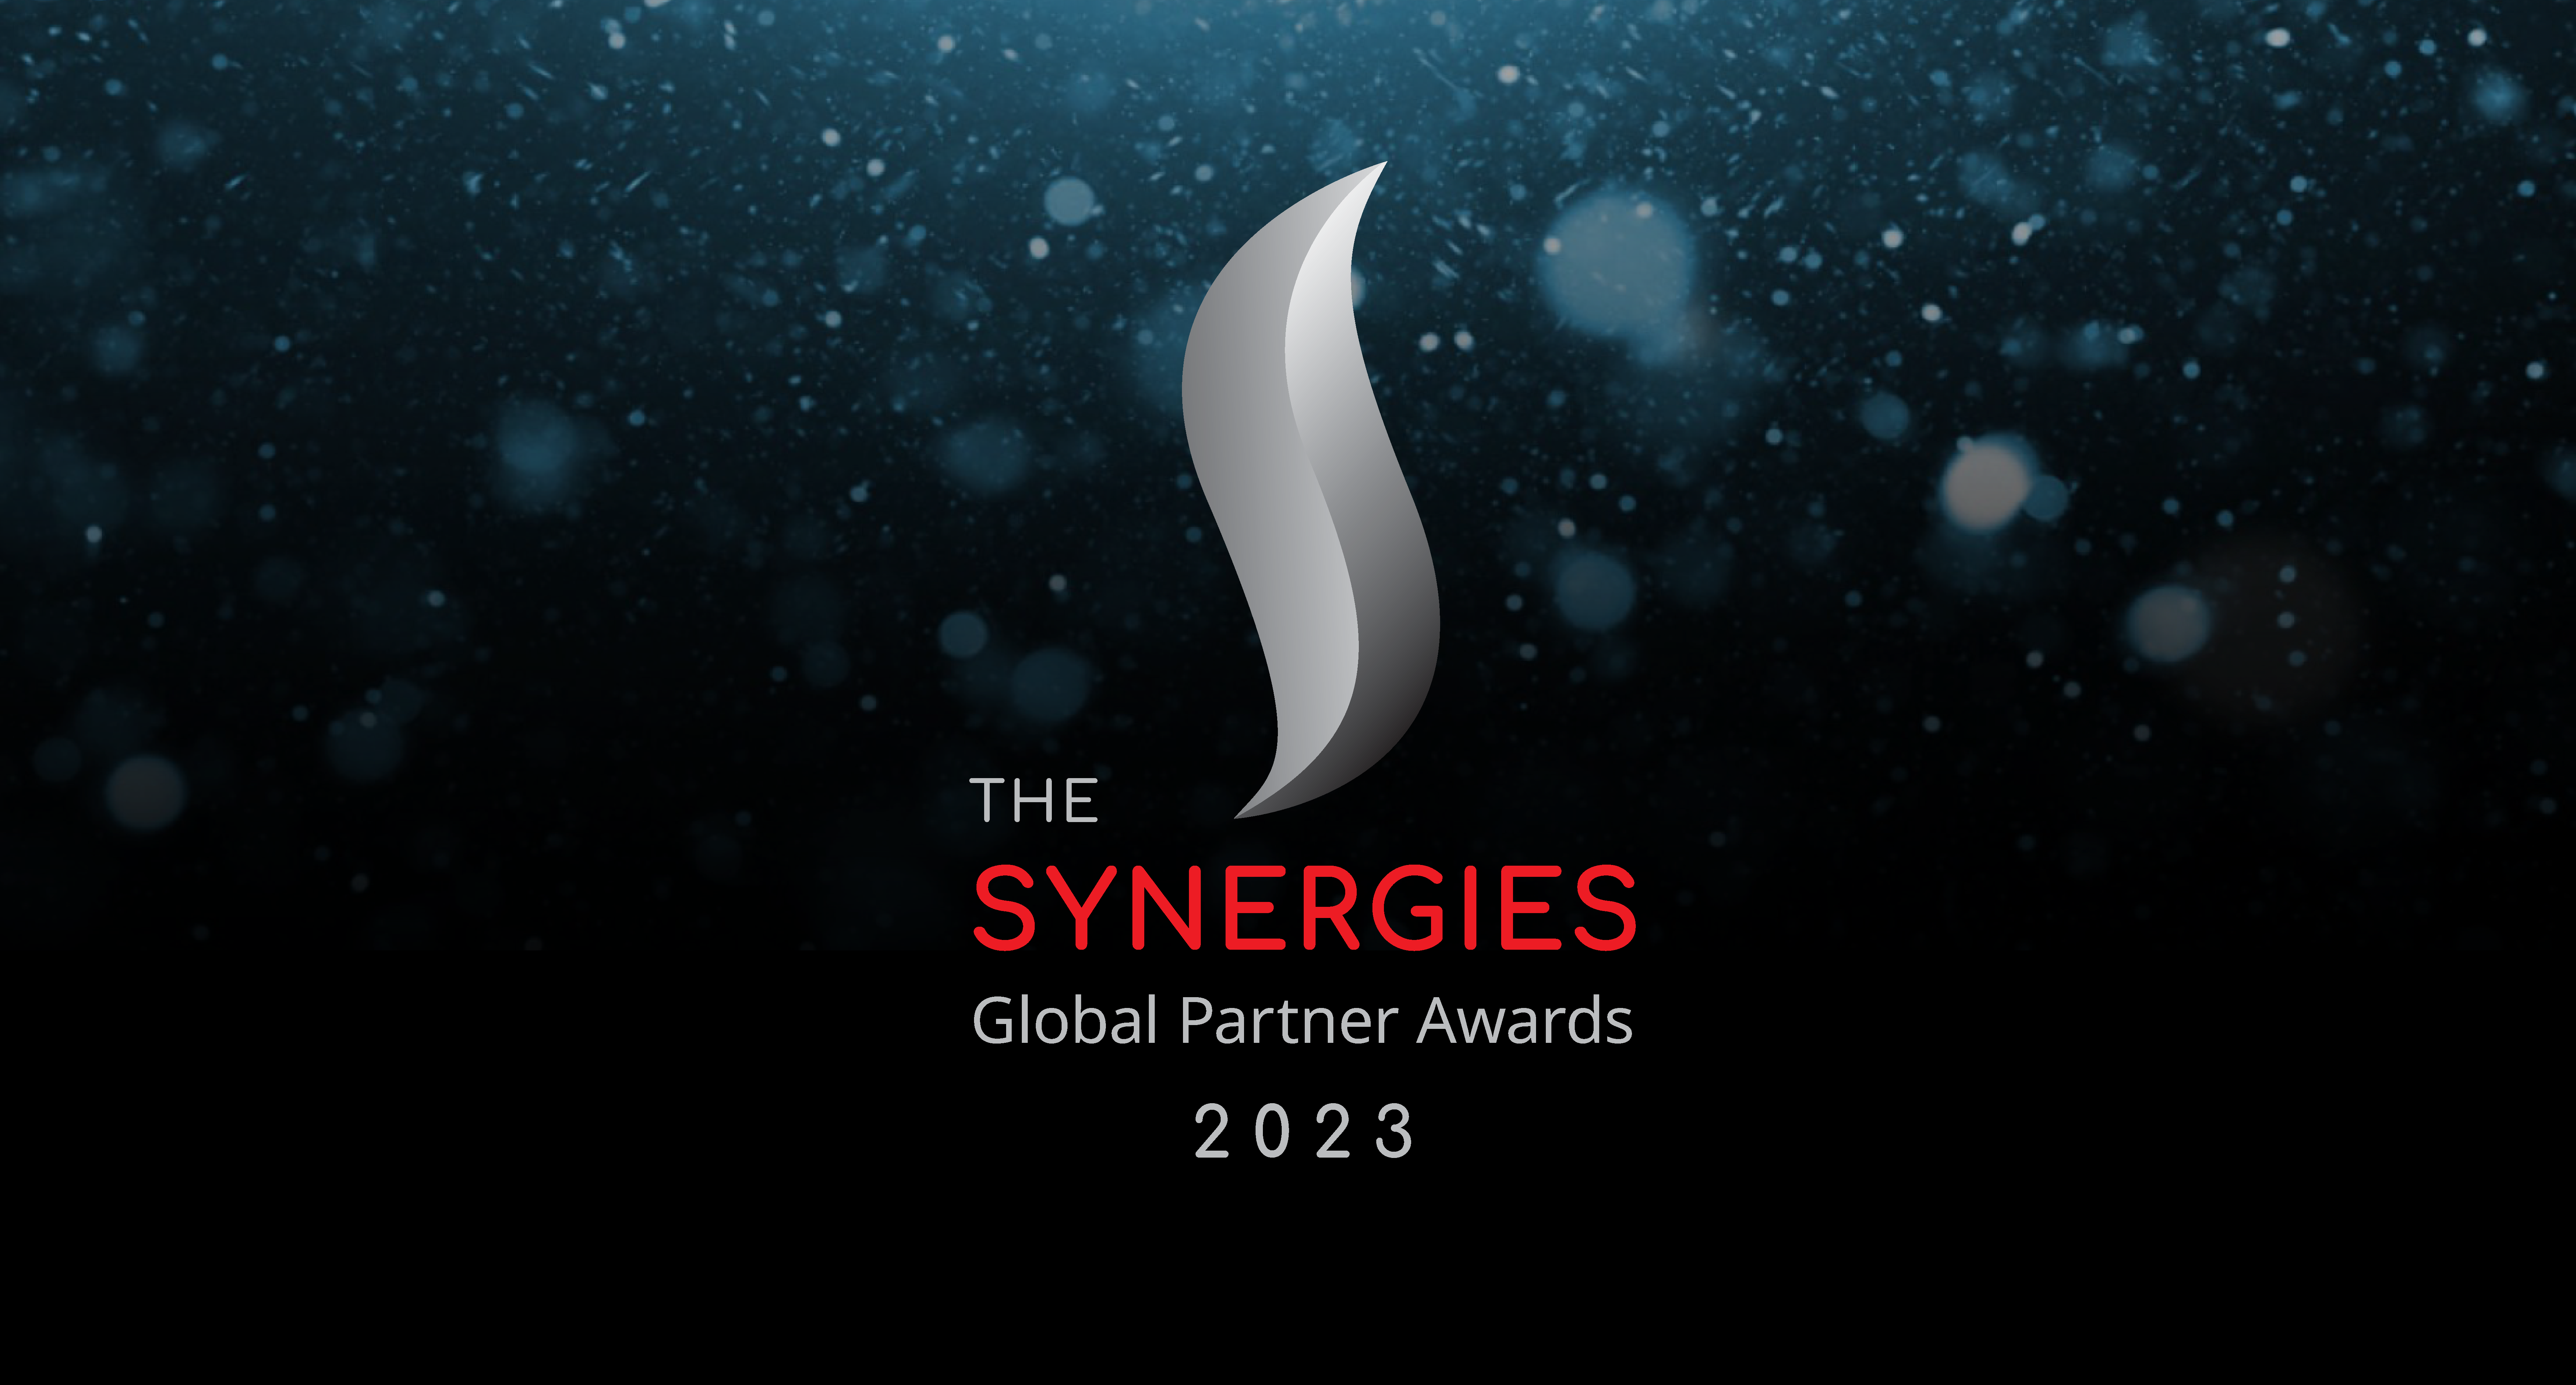 Synergy Honors 25 Partners at The Synergies Annual Supplier Awards Events in London, Singapore and New Orleans